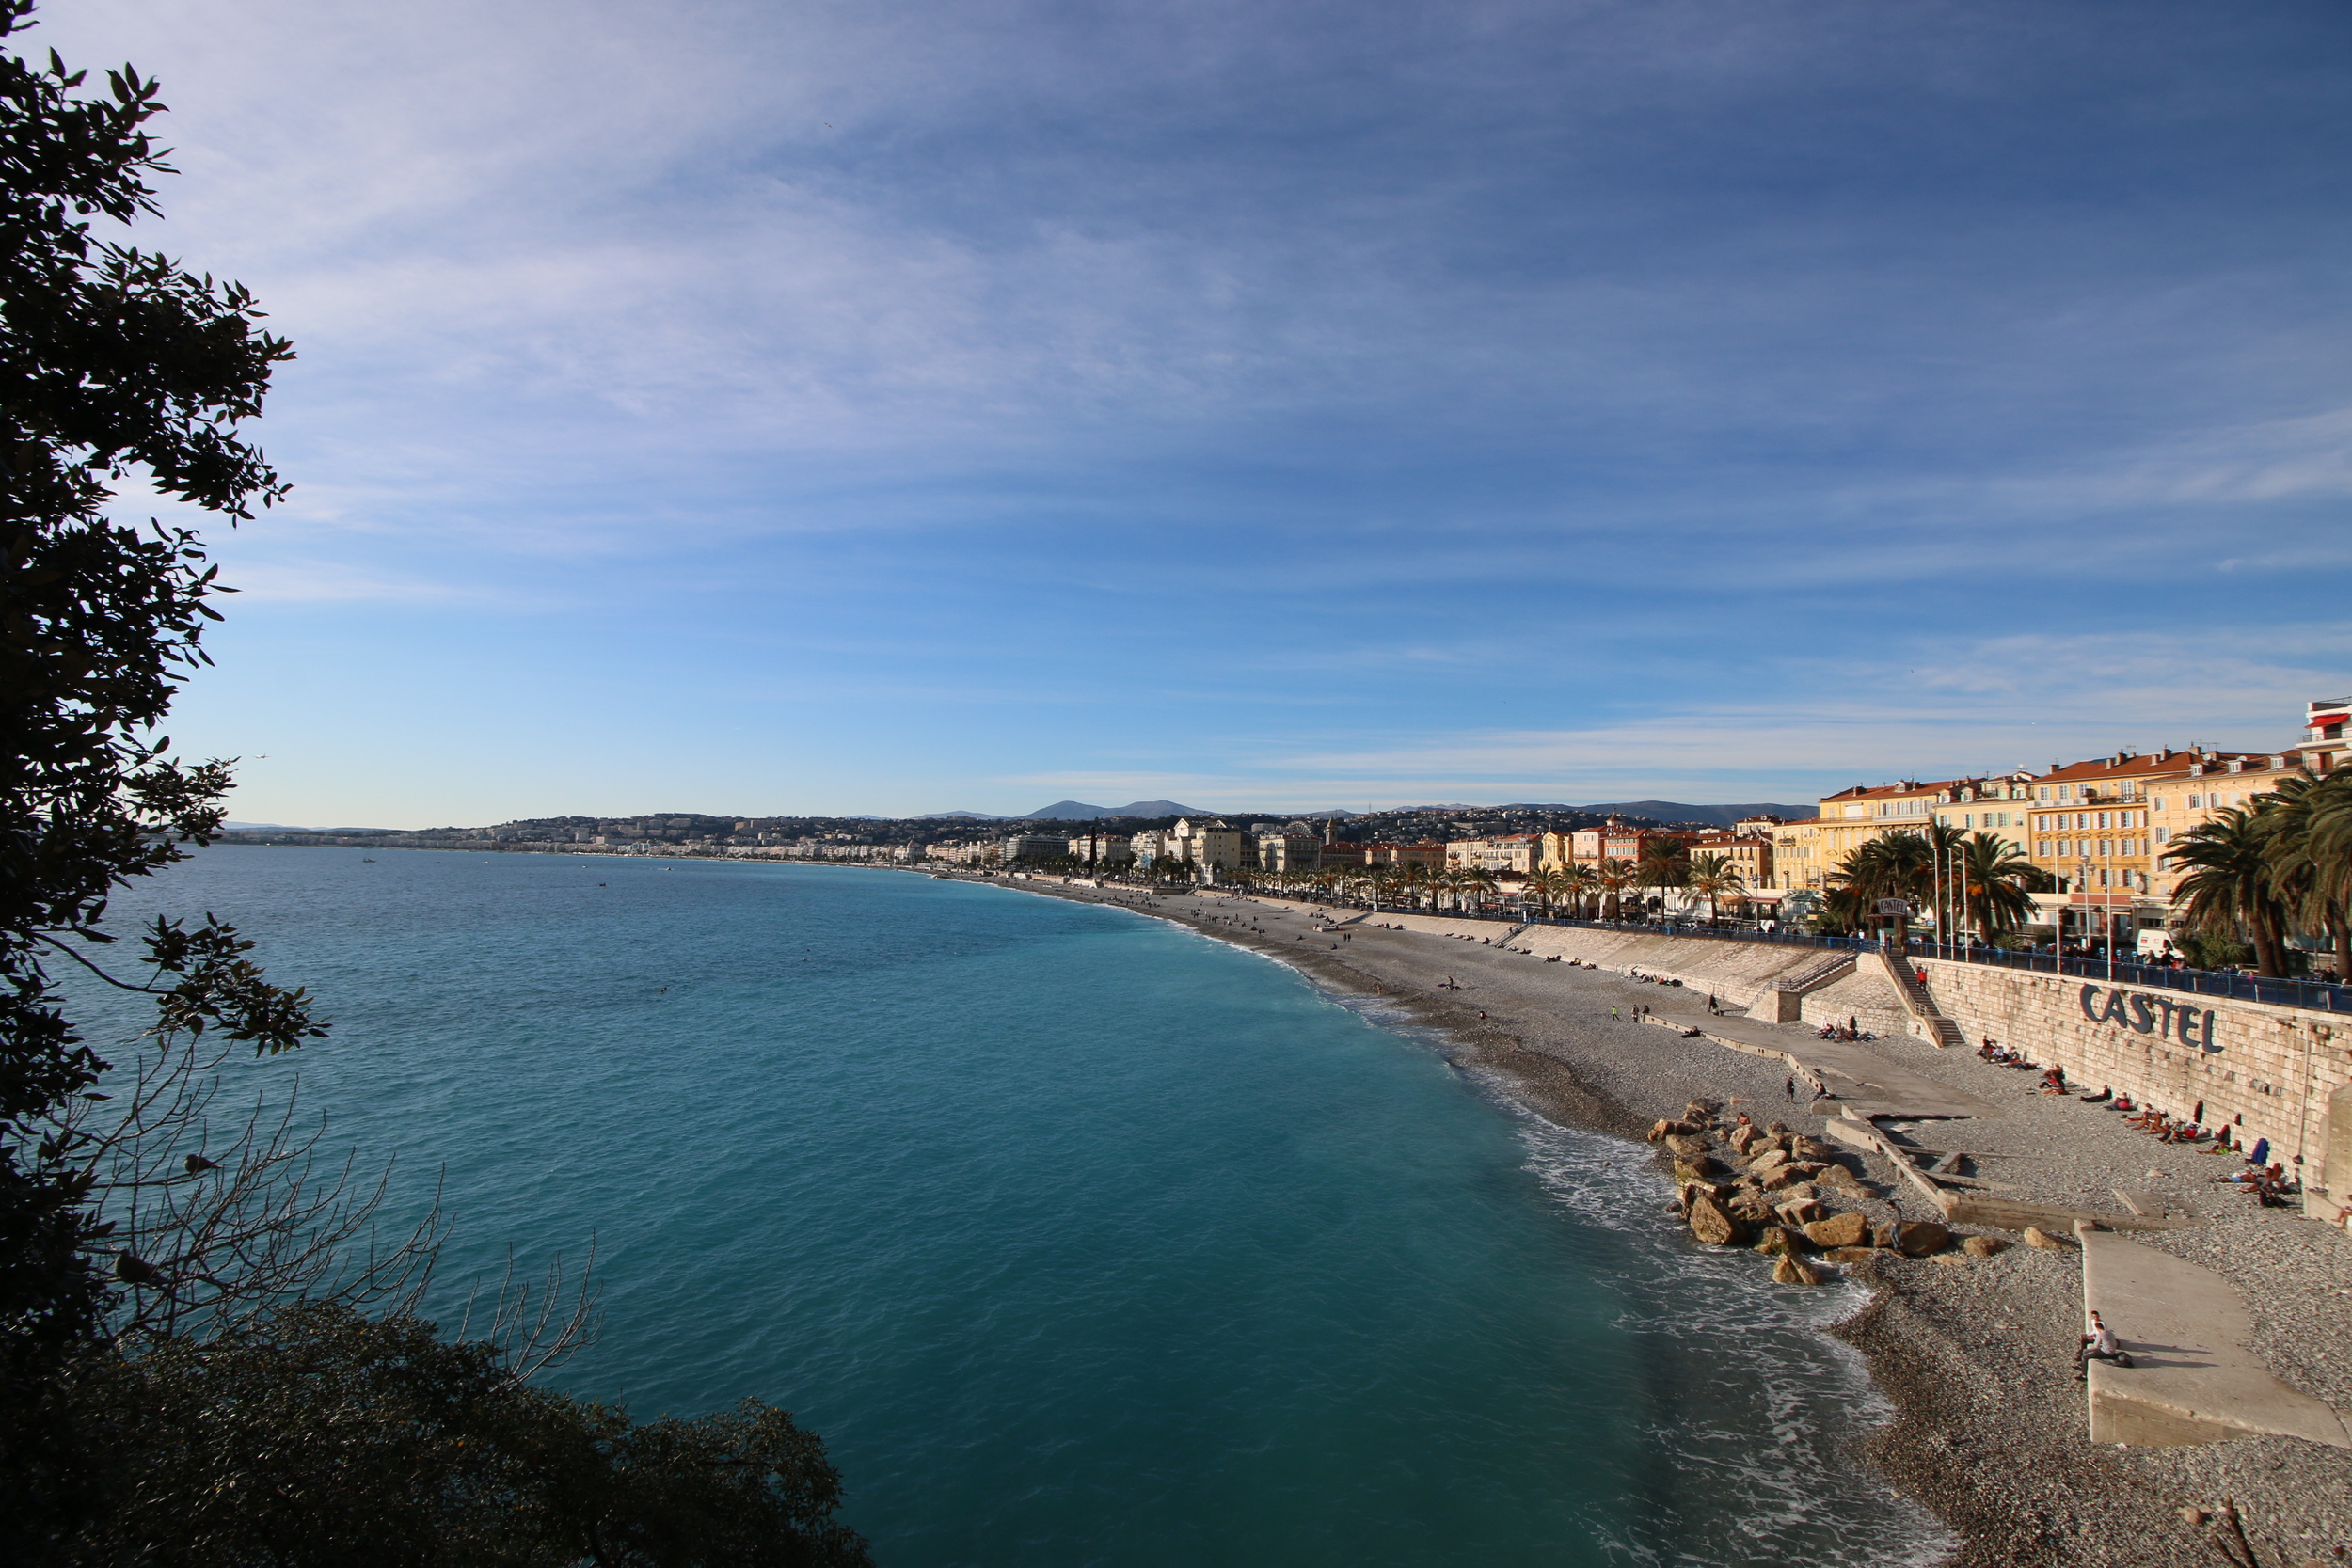 Nice seafront